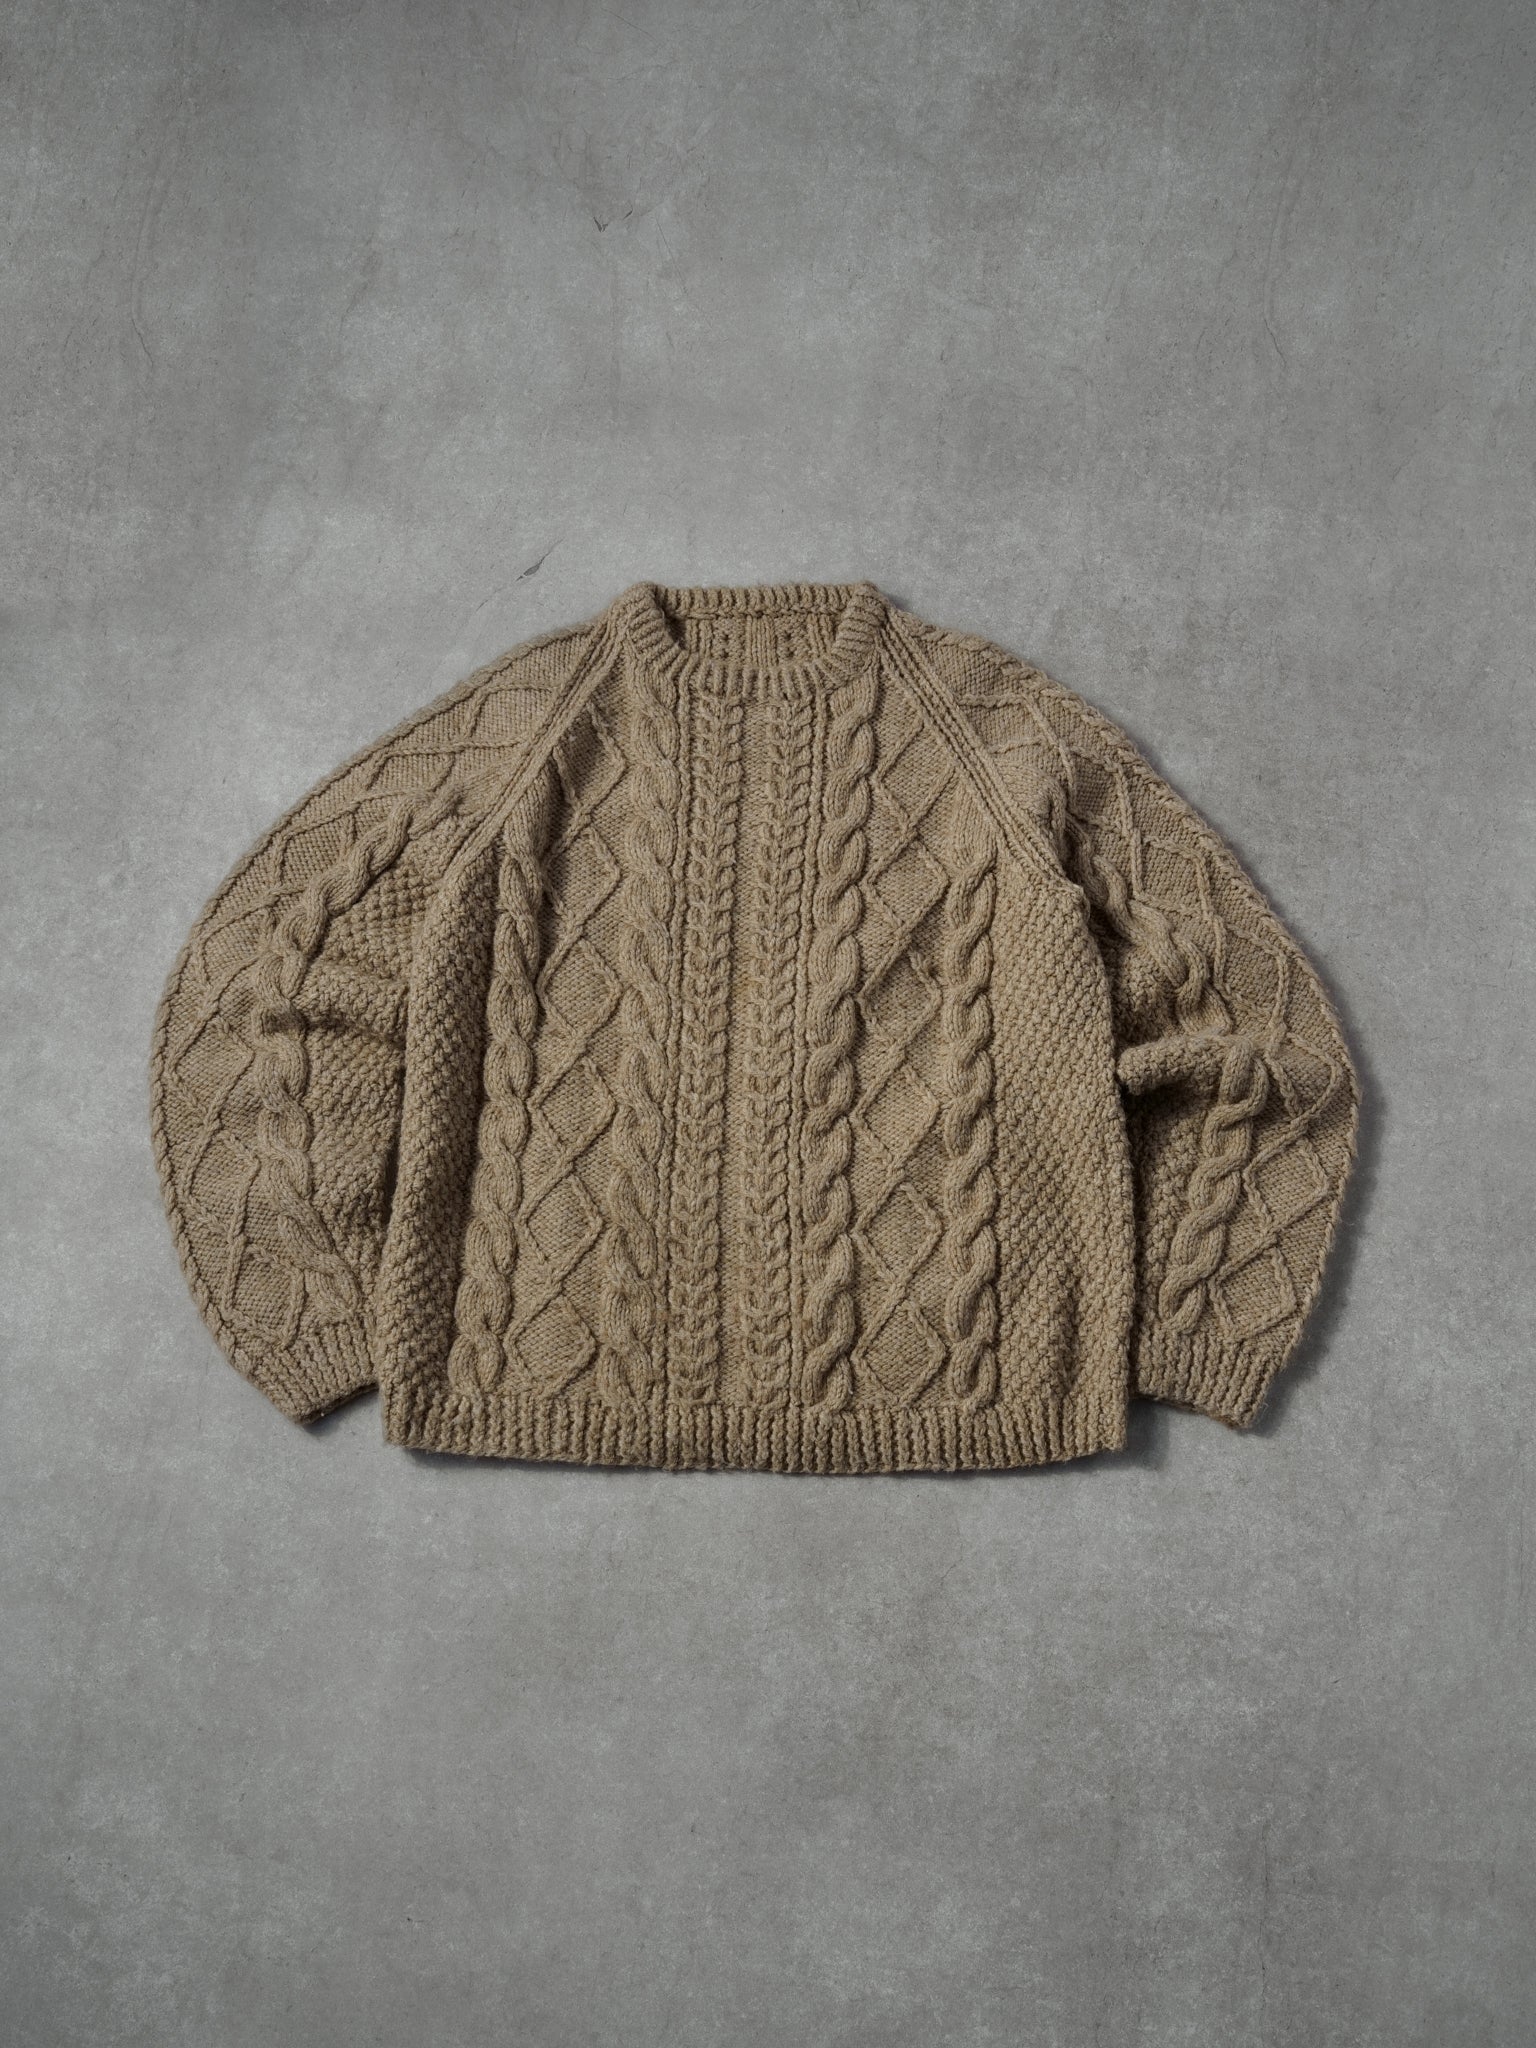 Vintage 90s Light Brown Cable Knit Patterned Sweater (S)